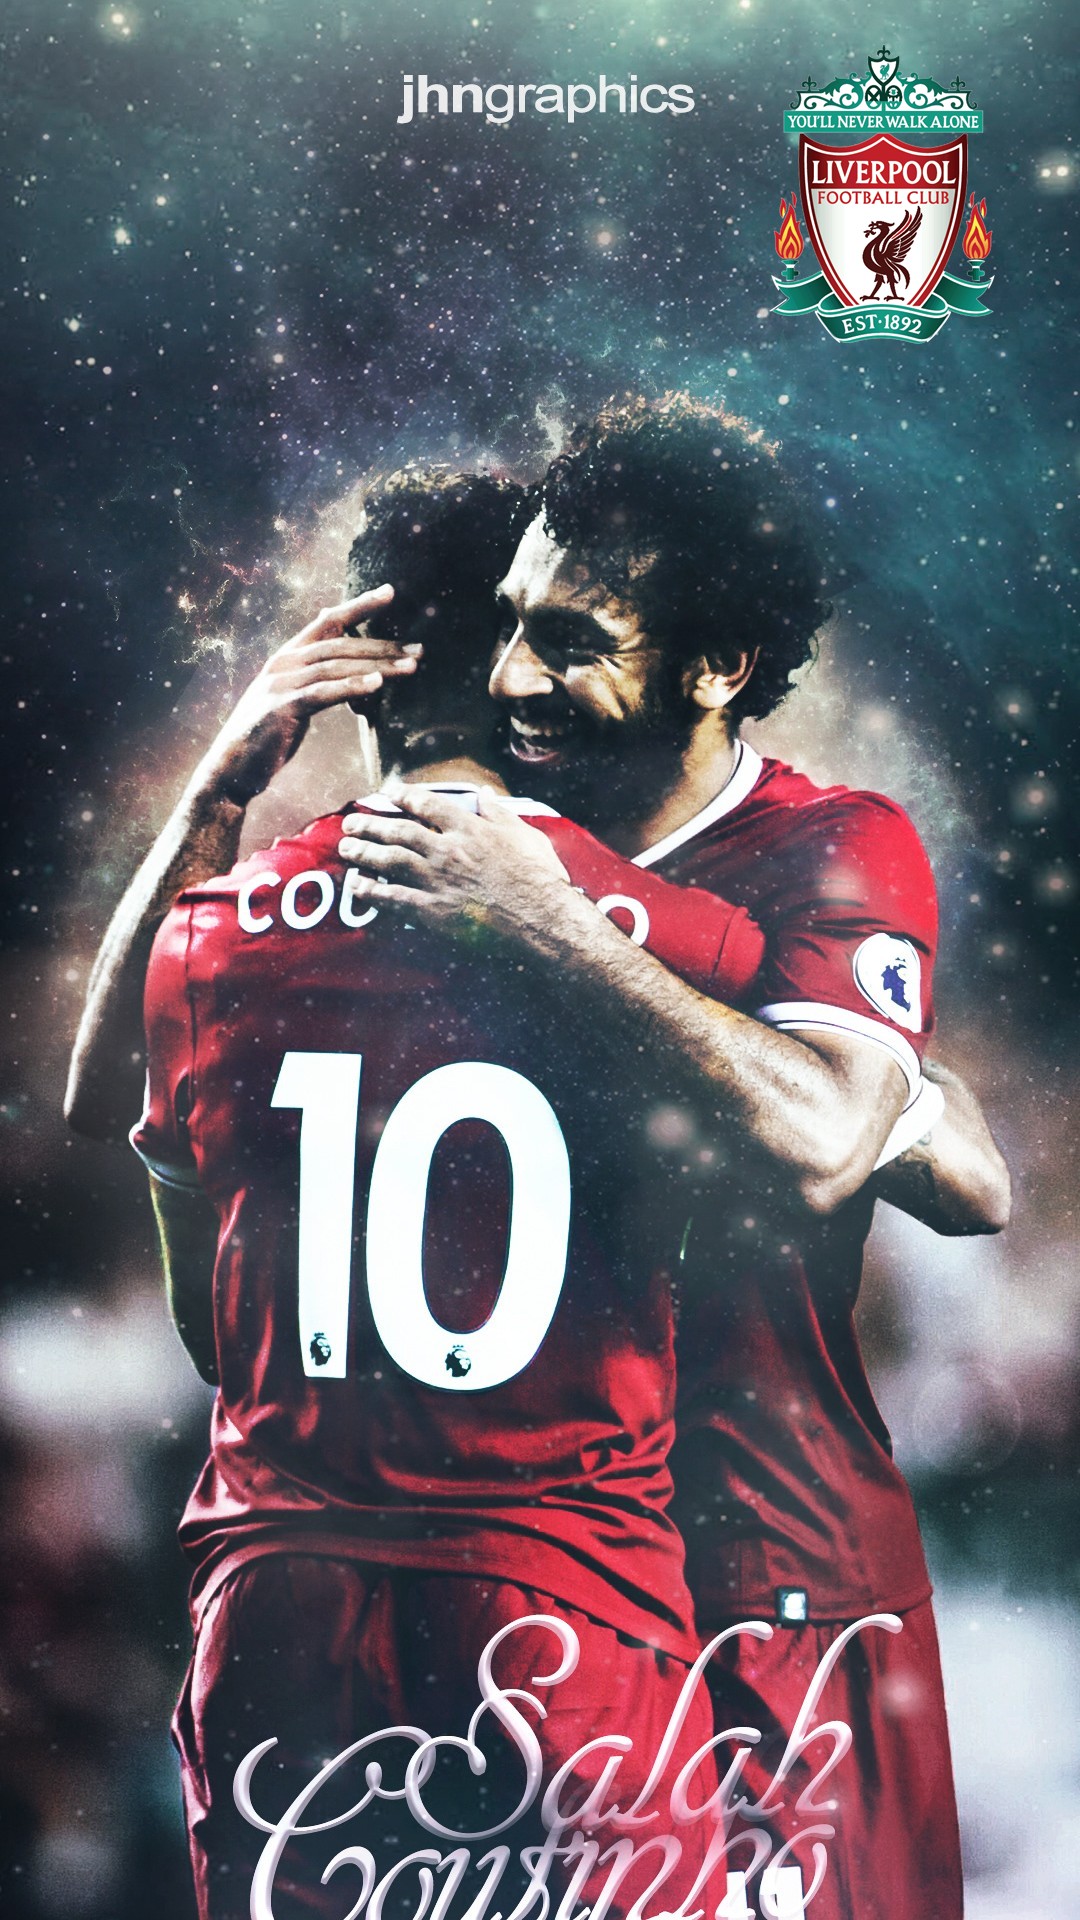 Iphone 7 Wallpaper Liverpool Mohamed Salah With Image - Liverpool Fc -  1080x1920 Wallpaper 